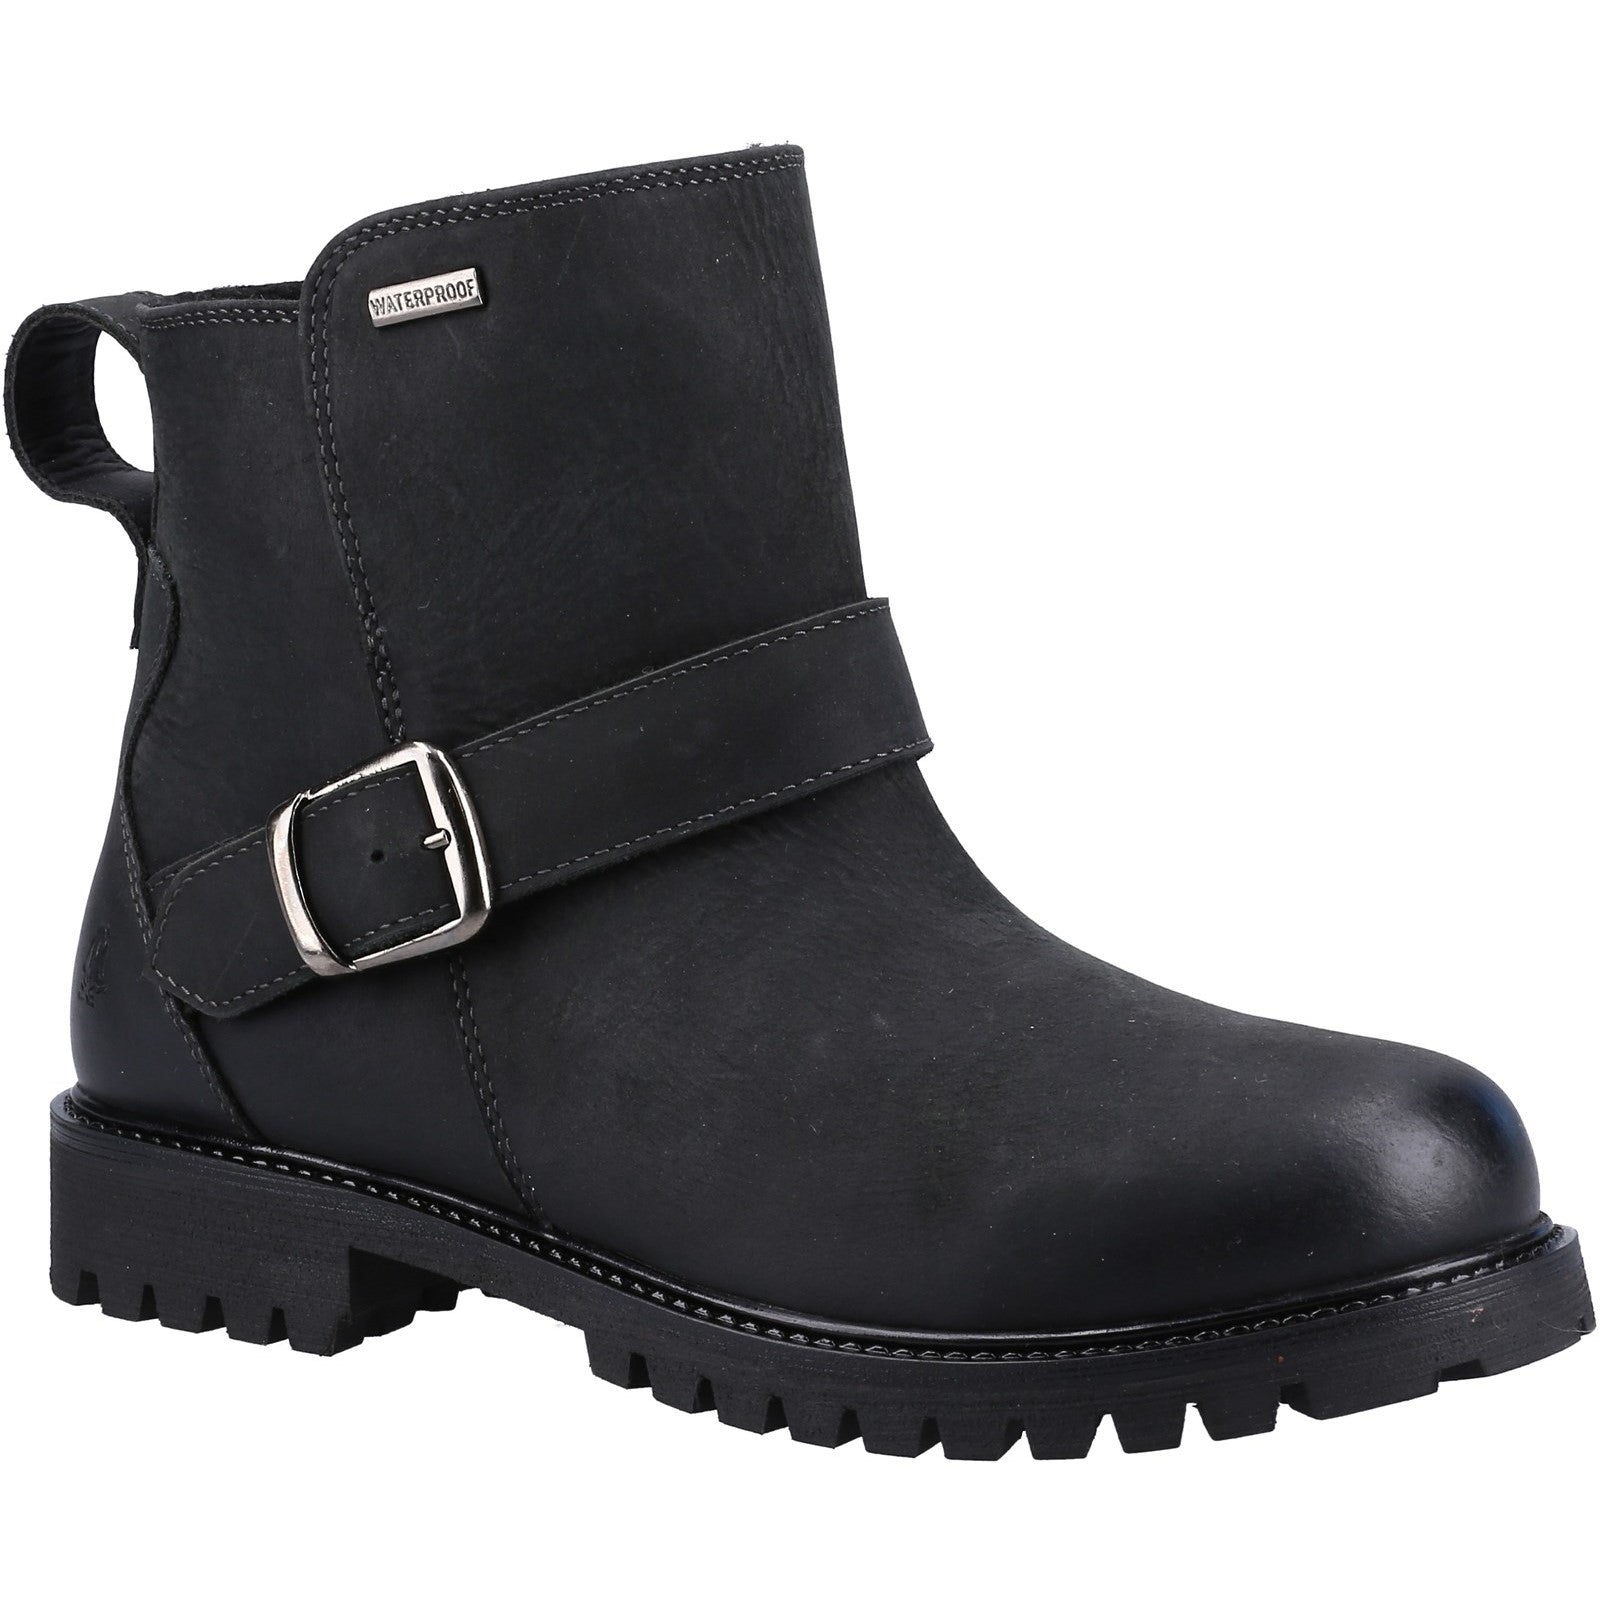 Hush Puppies Womens Wakely Shearling Lined Leather Ankle Boots - Black